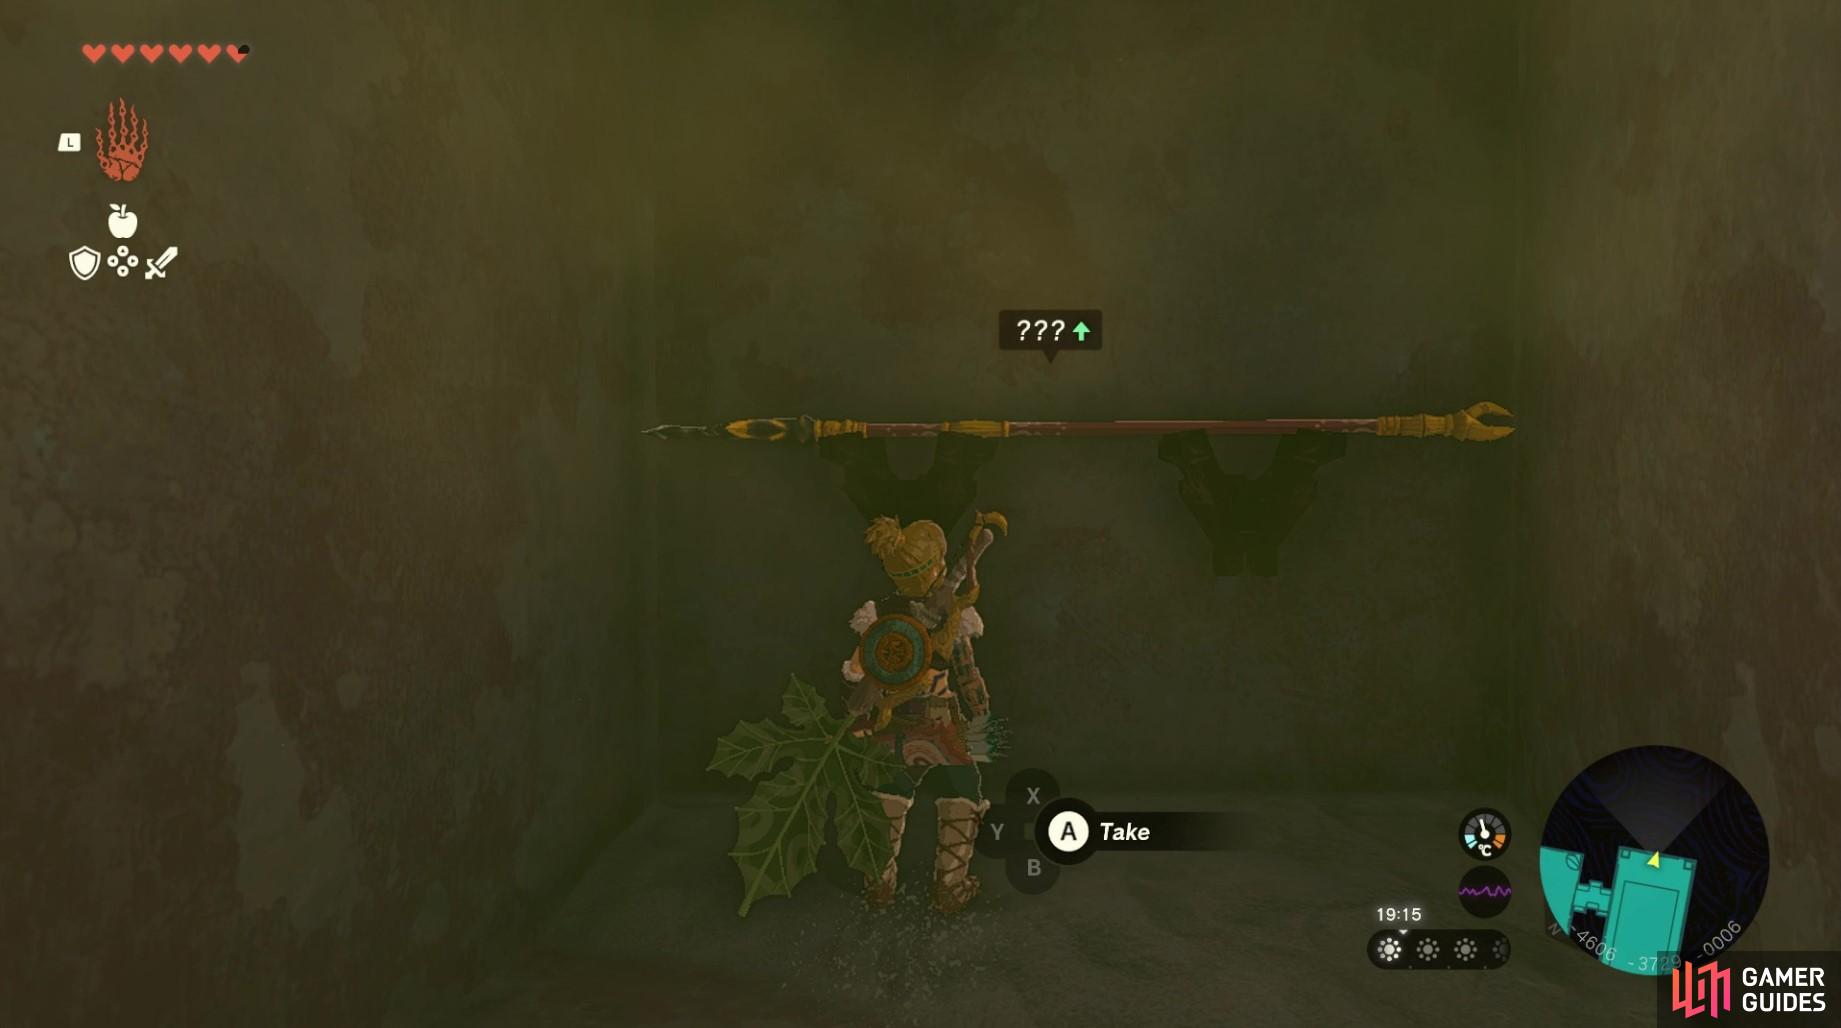 so you can pass behind into a secret room with a spear!